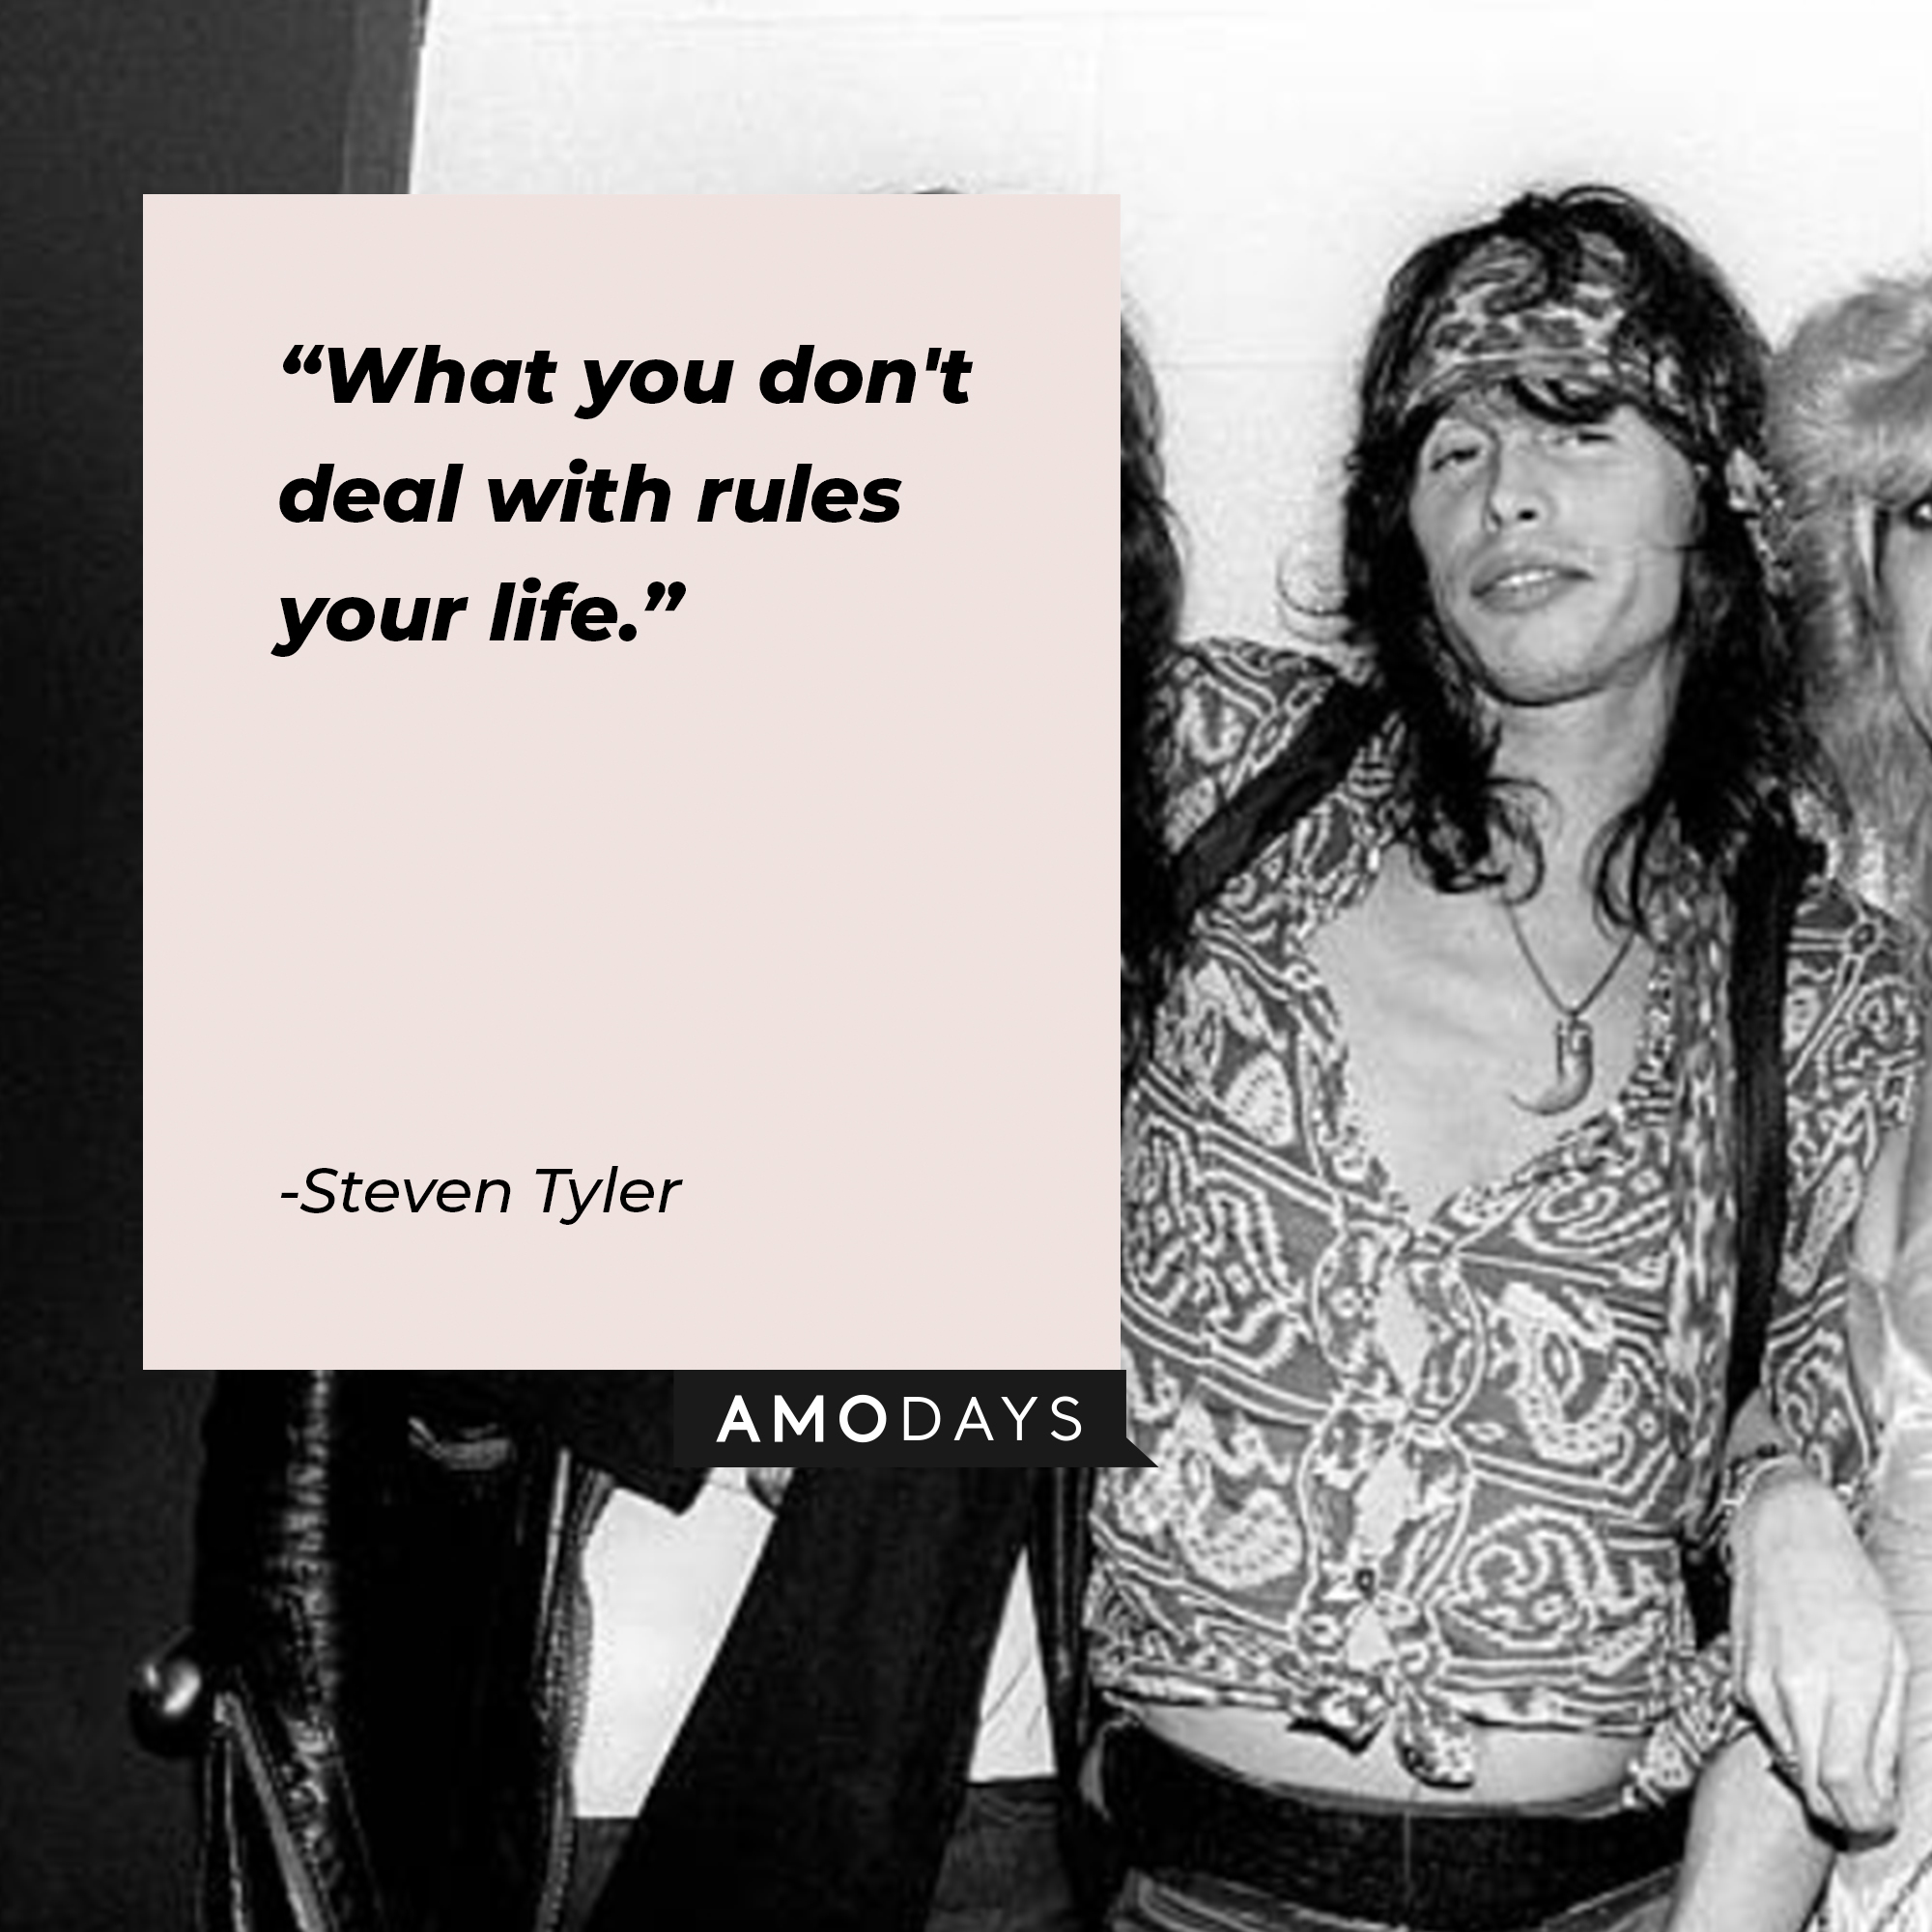 Steven Tyler's quote: "What you don't deal with rules your life." | Source: Getty Images